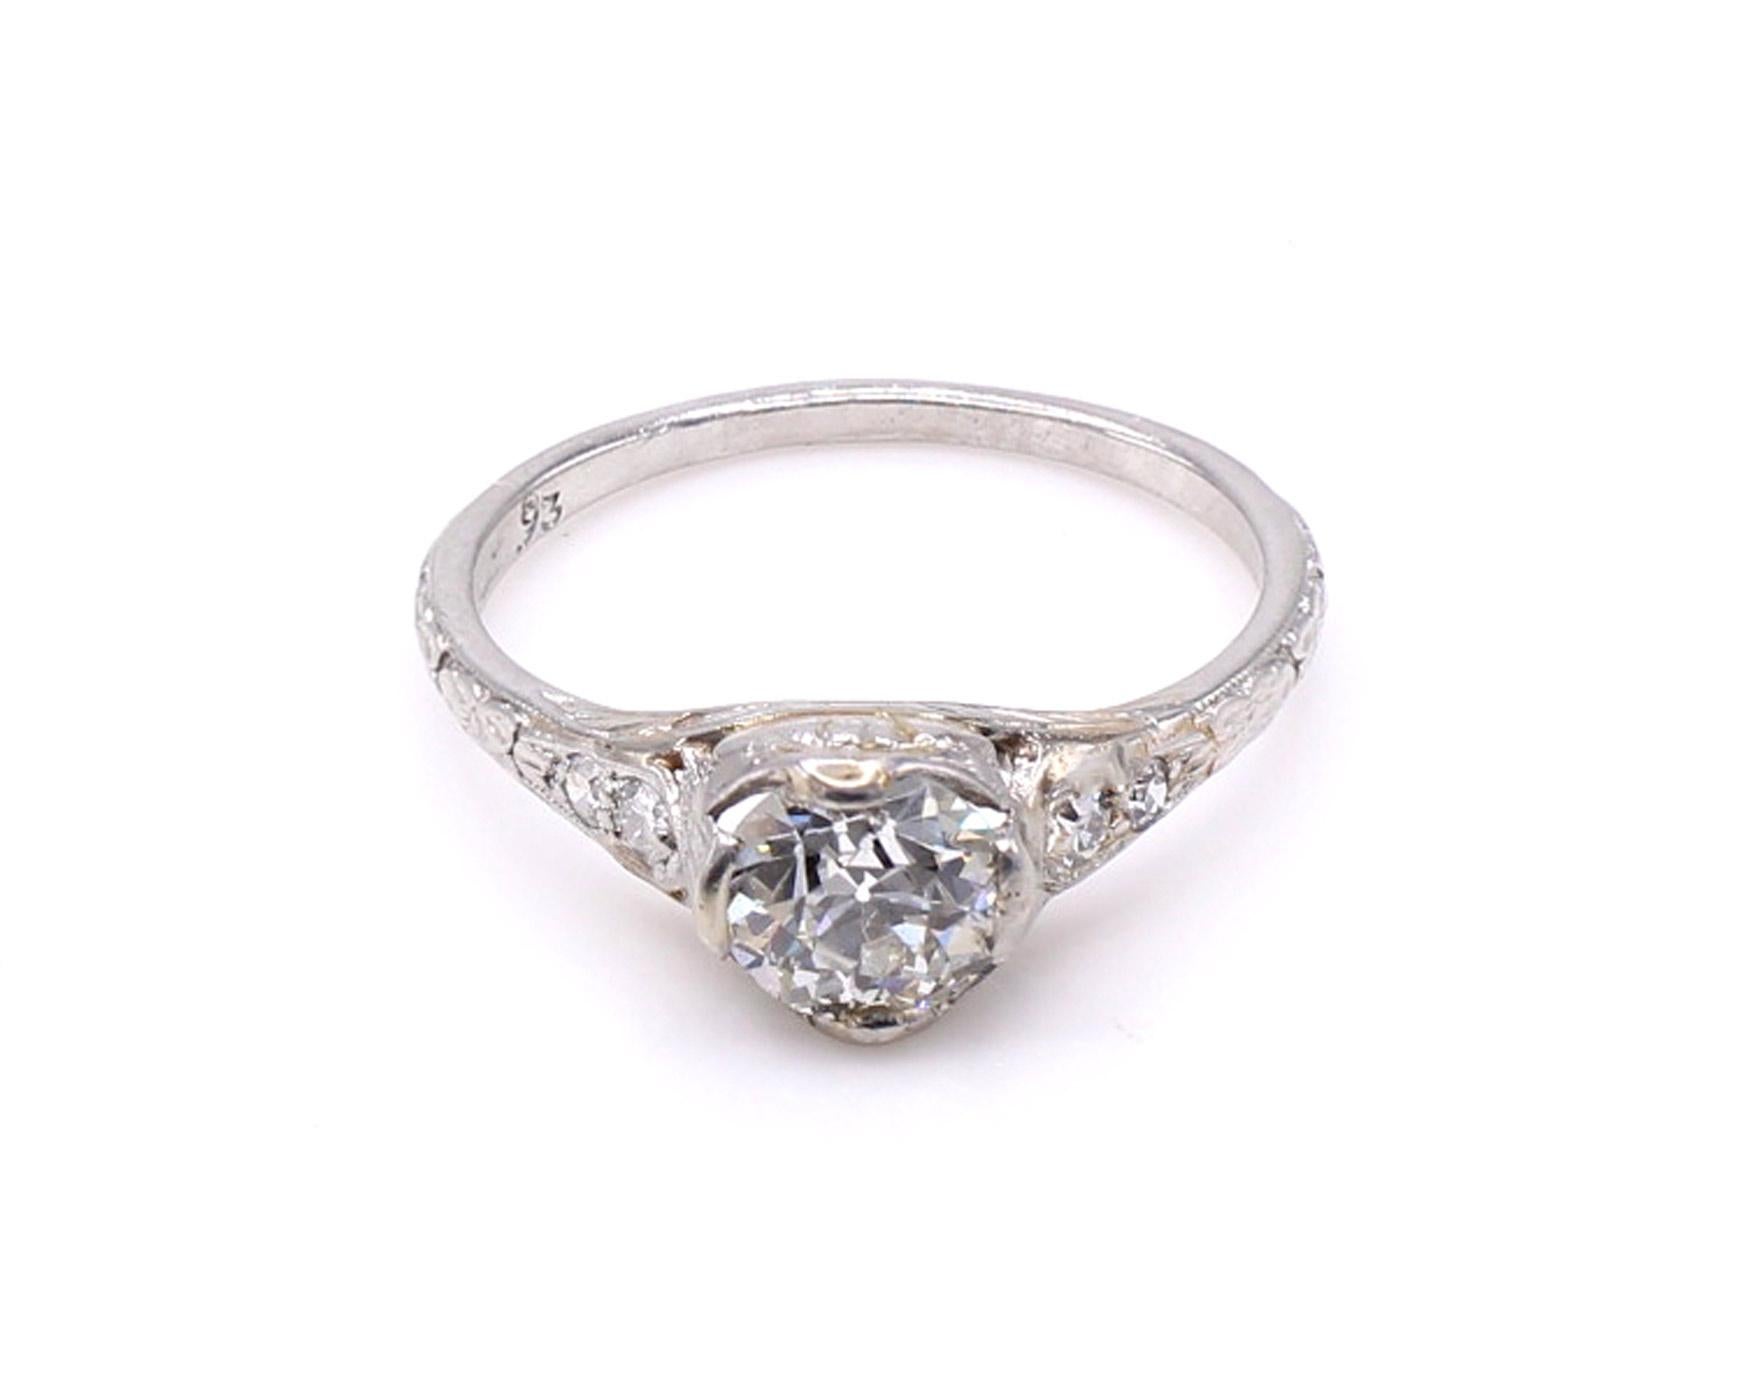 Beautifully designed and masterfully hand-crafted in platinum this Art Deco diamond engagement ring is both charming and unique. Set with an perfectly cut Old European Cut diamond, the wide faceting, high crown and small table give this diamond its